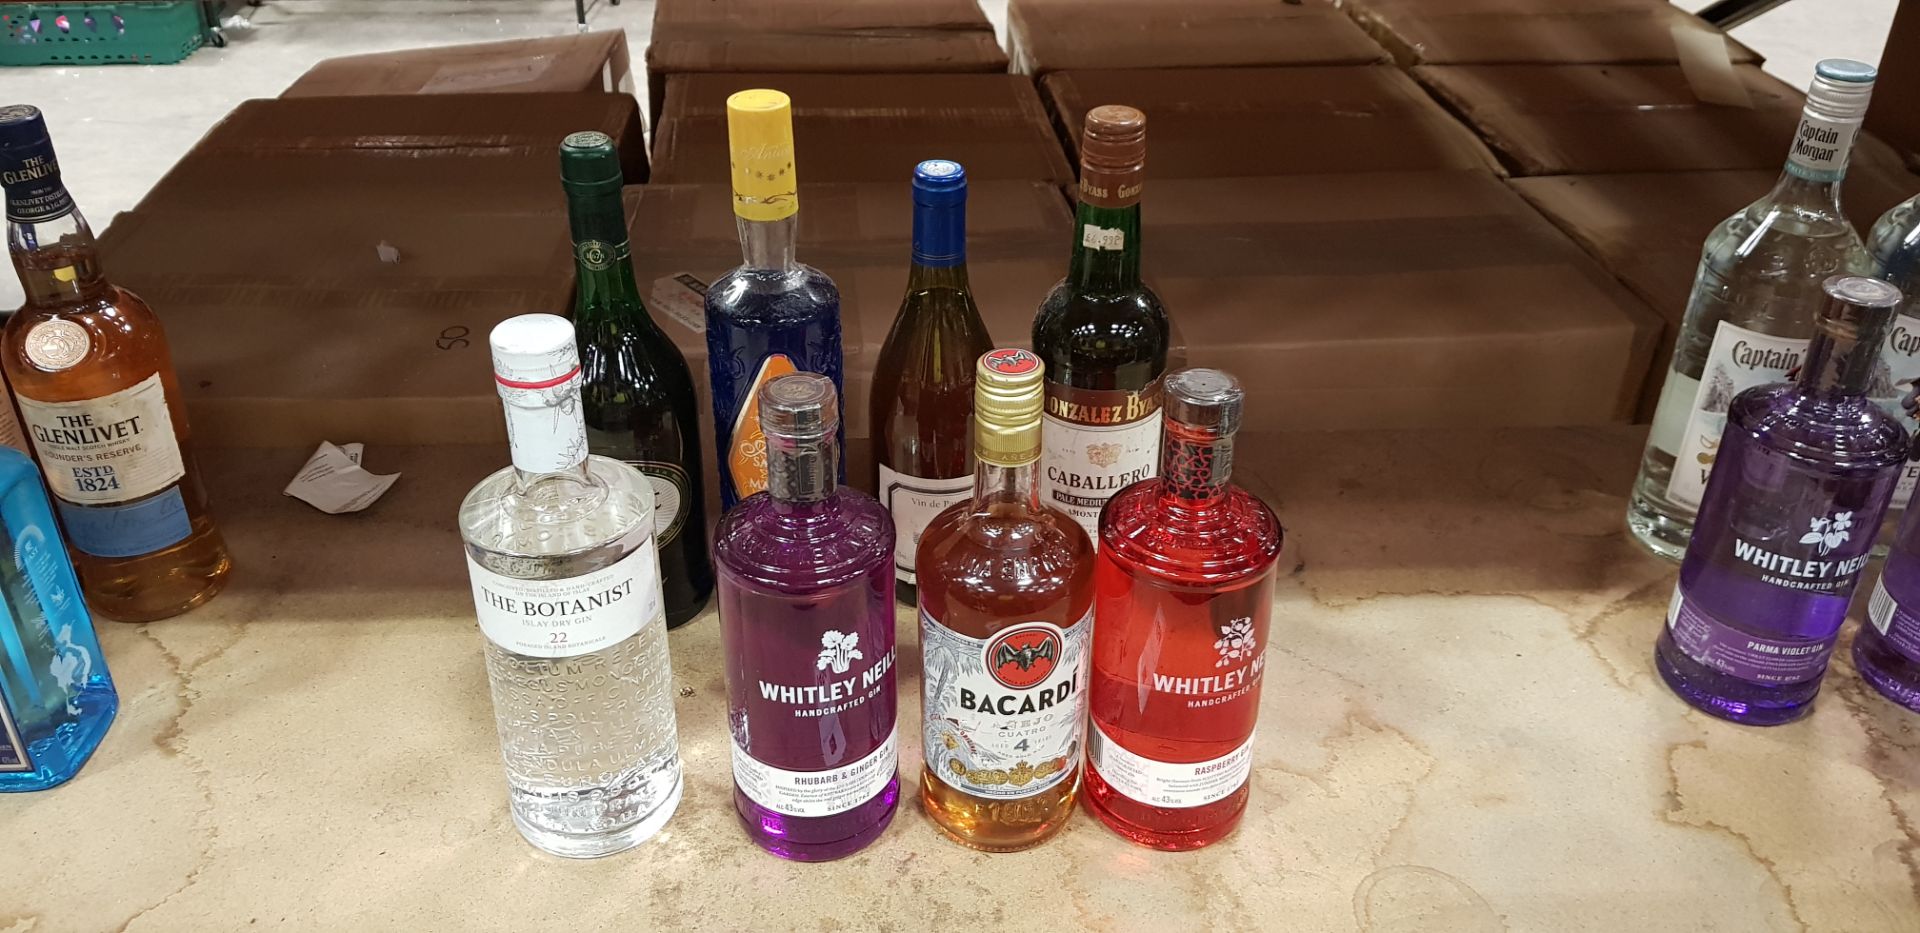 8 X PIECE MIXED ALCOHOL LOT CONTAINING 2 X WHITLEY NEILL GINS, 1 X THE BOTANIST DRY GIN 1 X